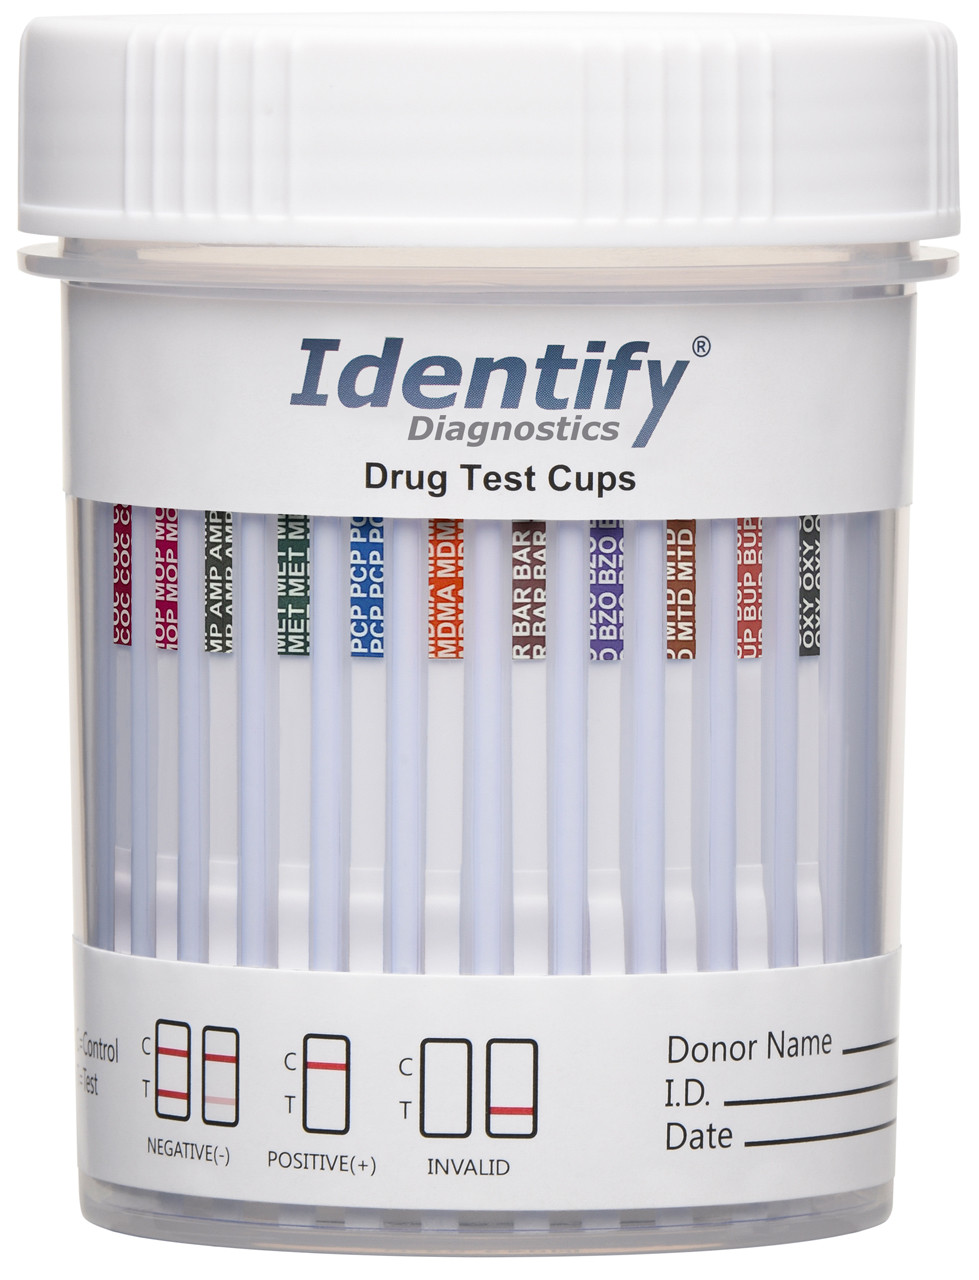 What Shows Up on a 12 Panel Drug Test?